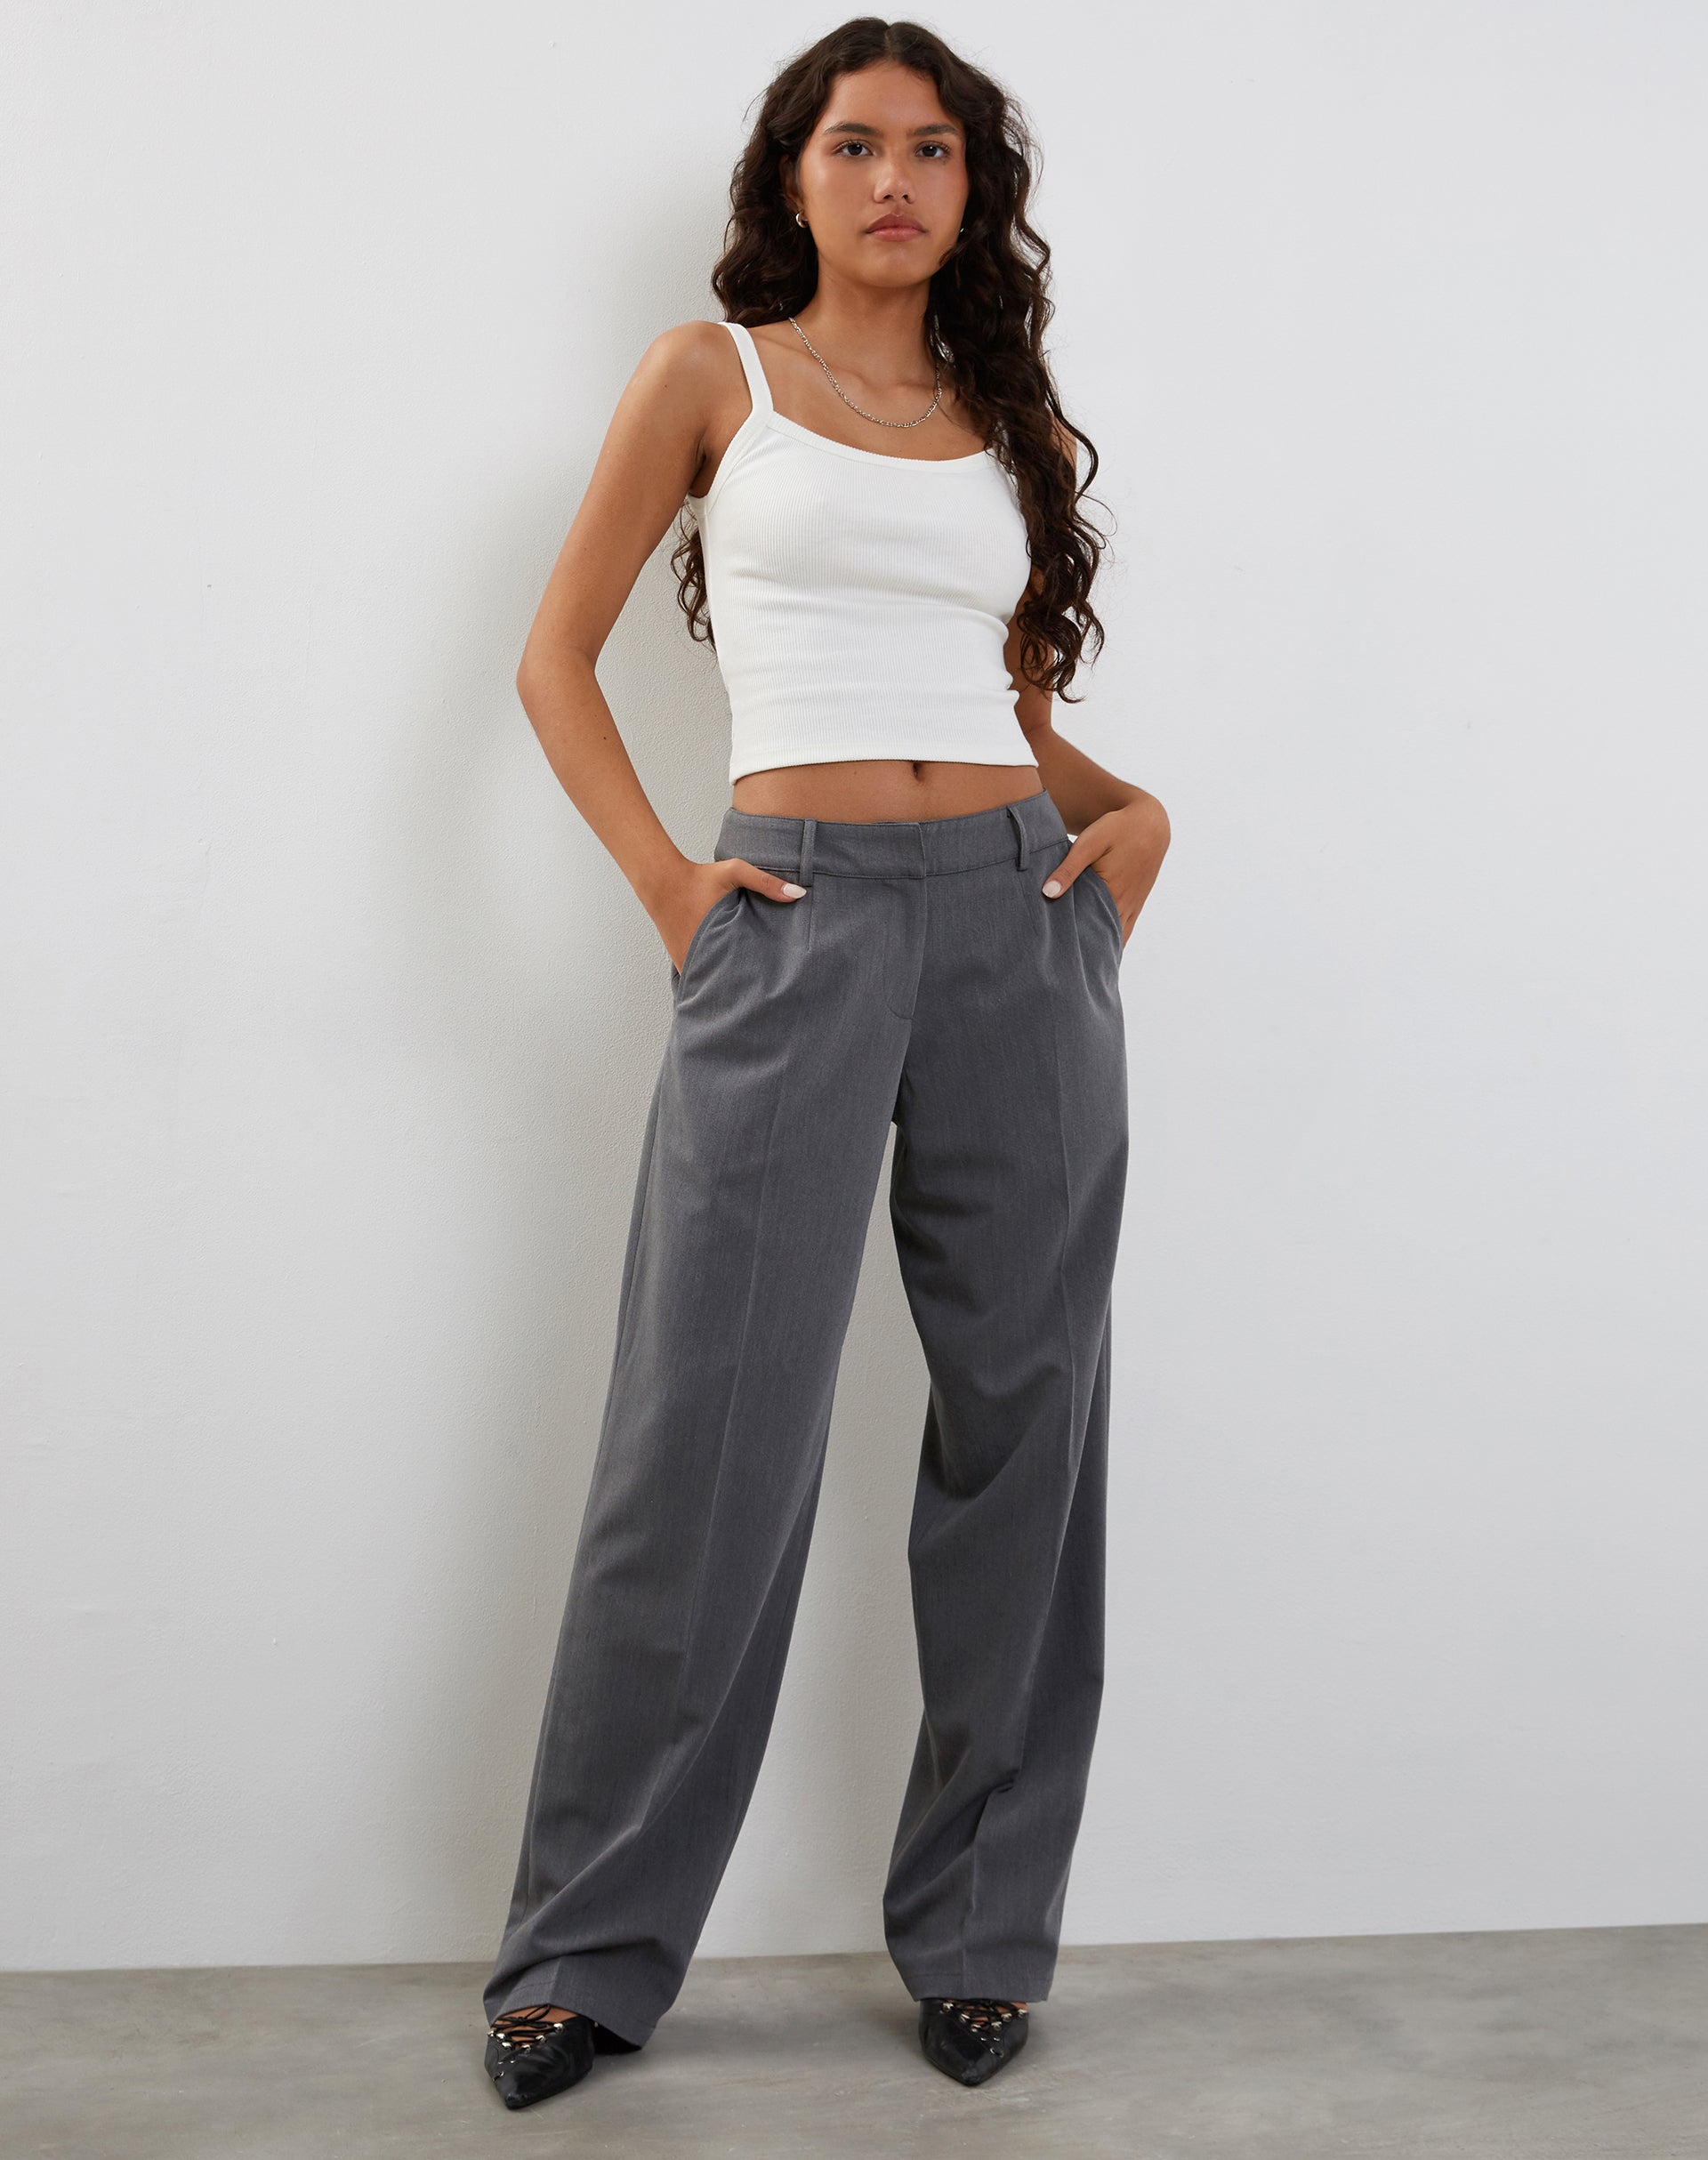 Maeve Low-Slung Trousers | Anthropologie